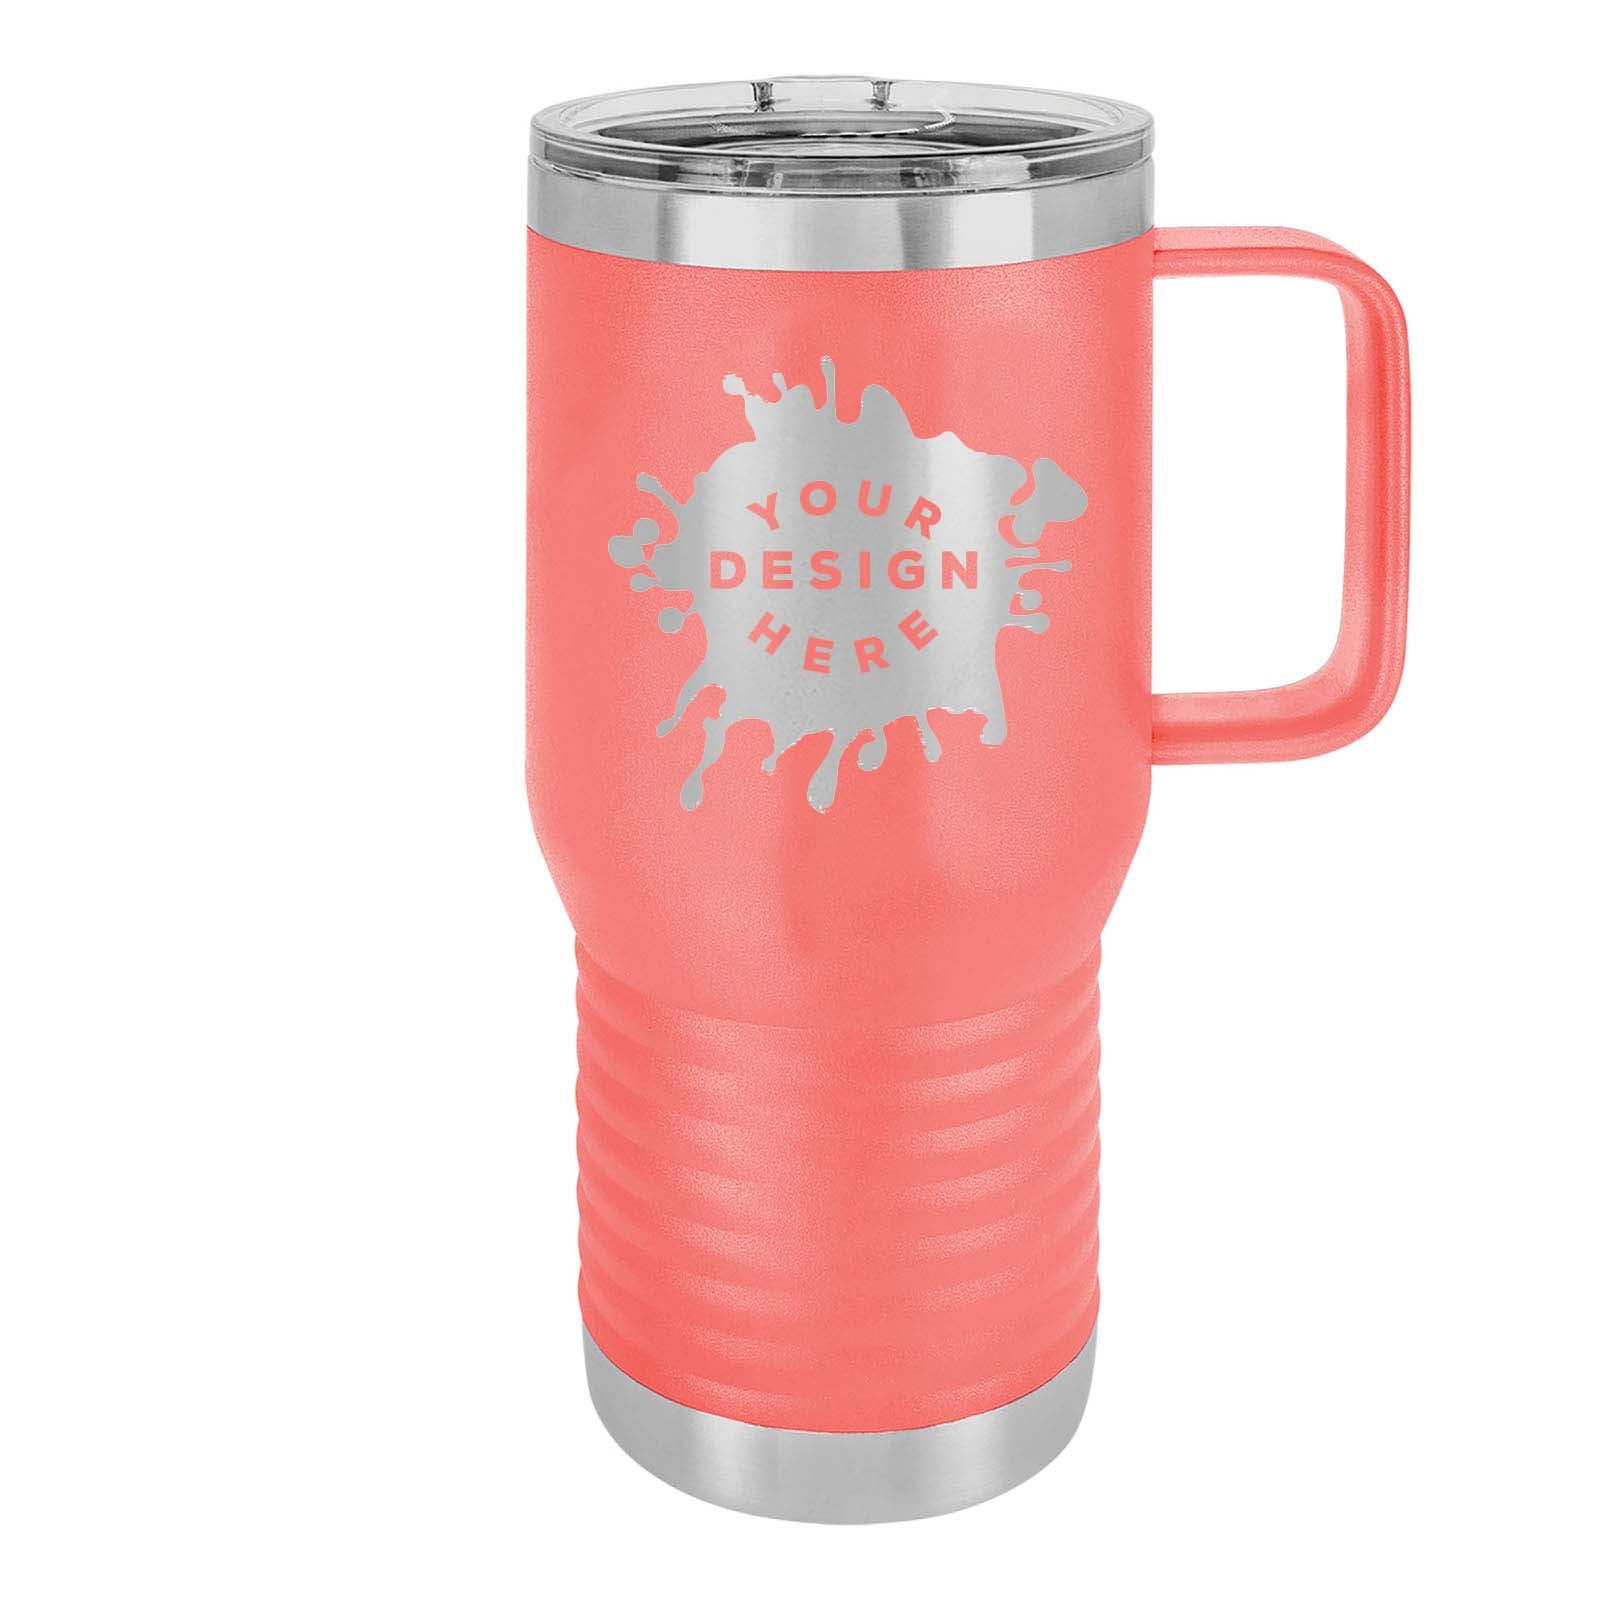 Travel Coffee Mug Best Dad Ever Engraved 20 Oz. Stainless 